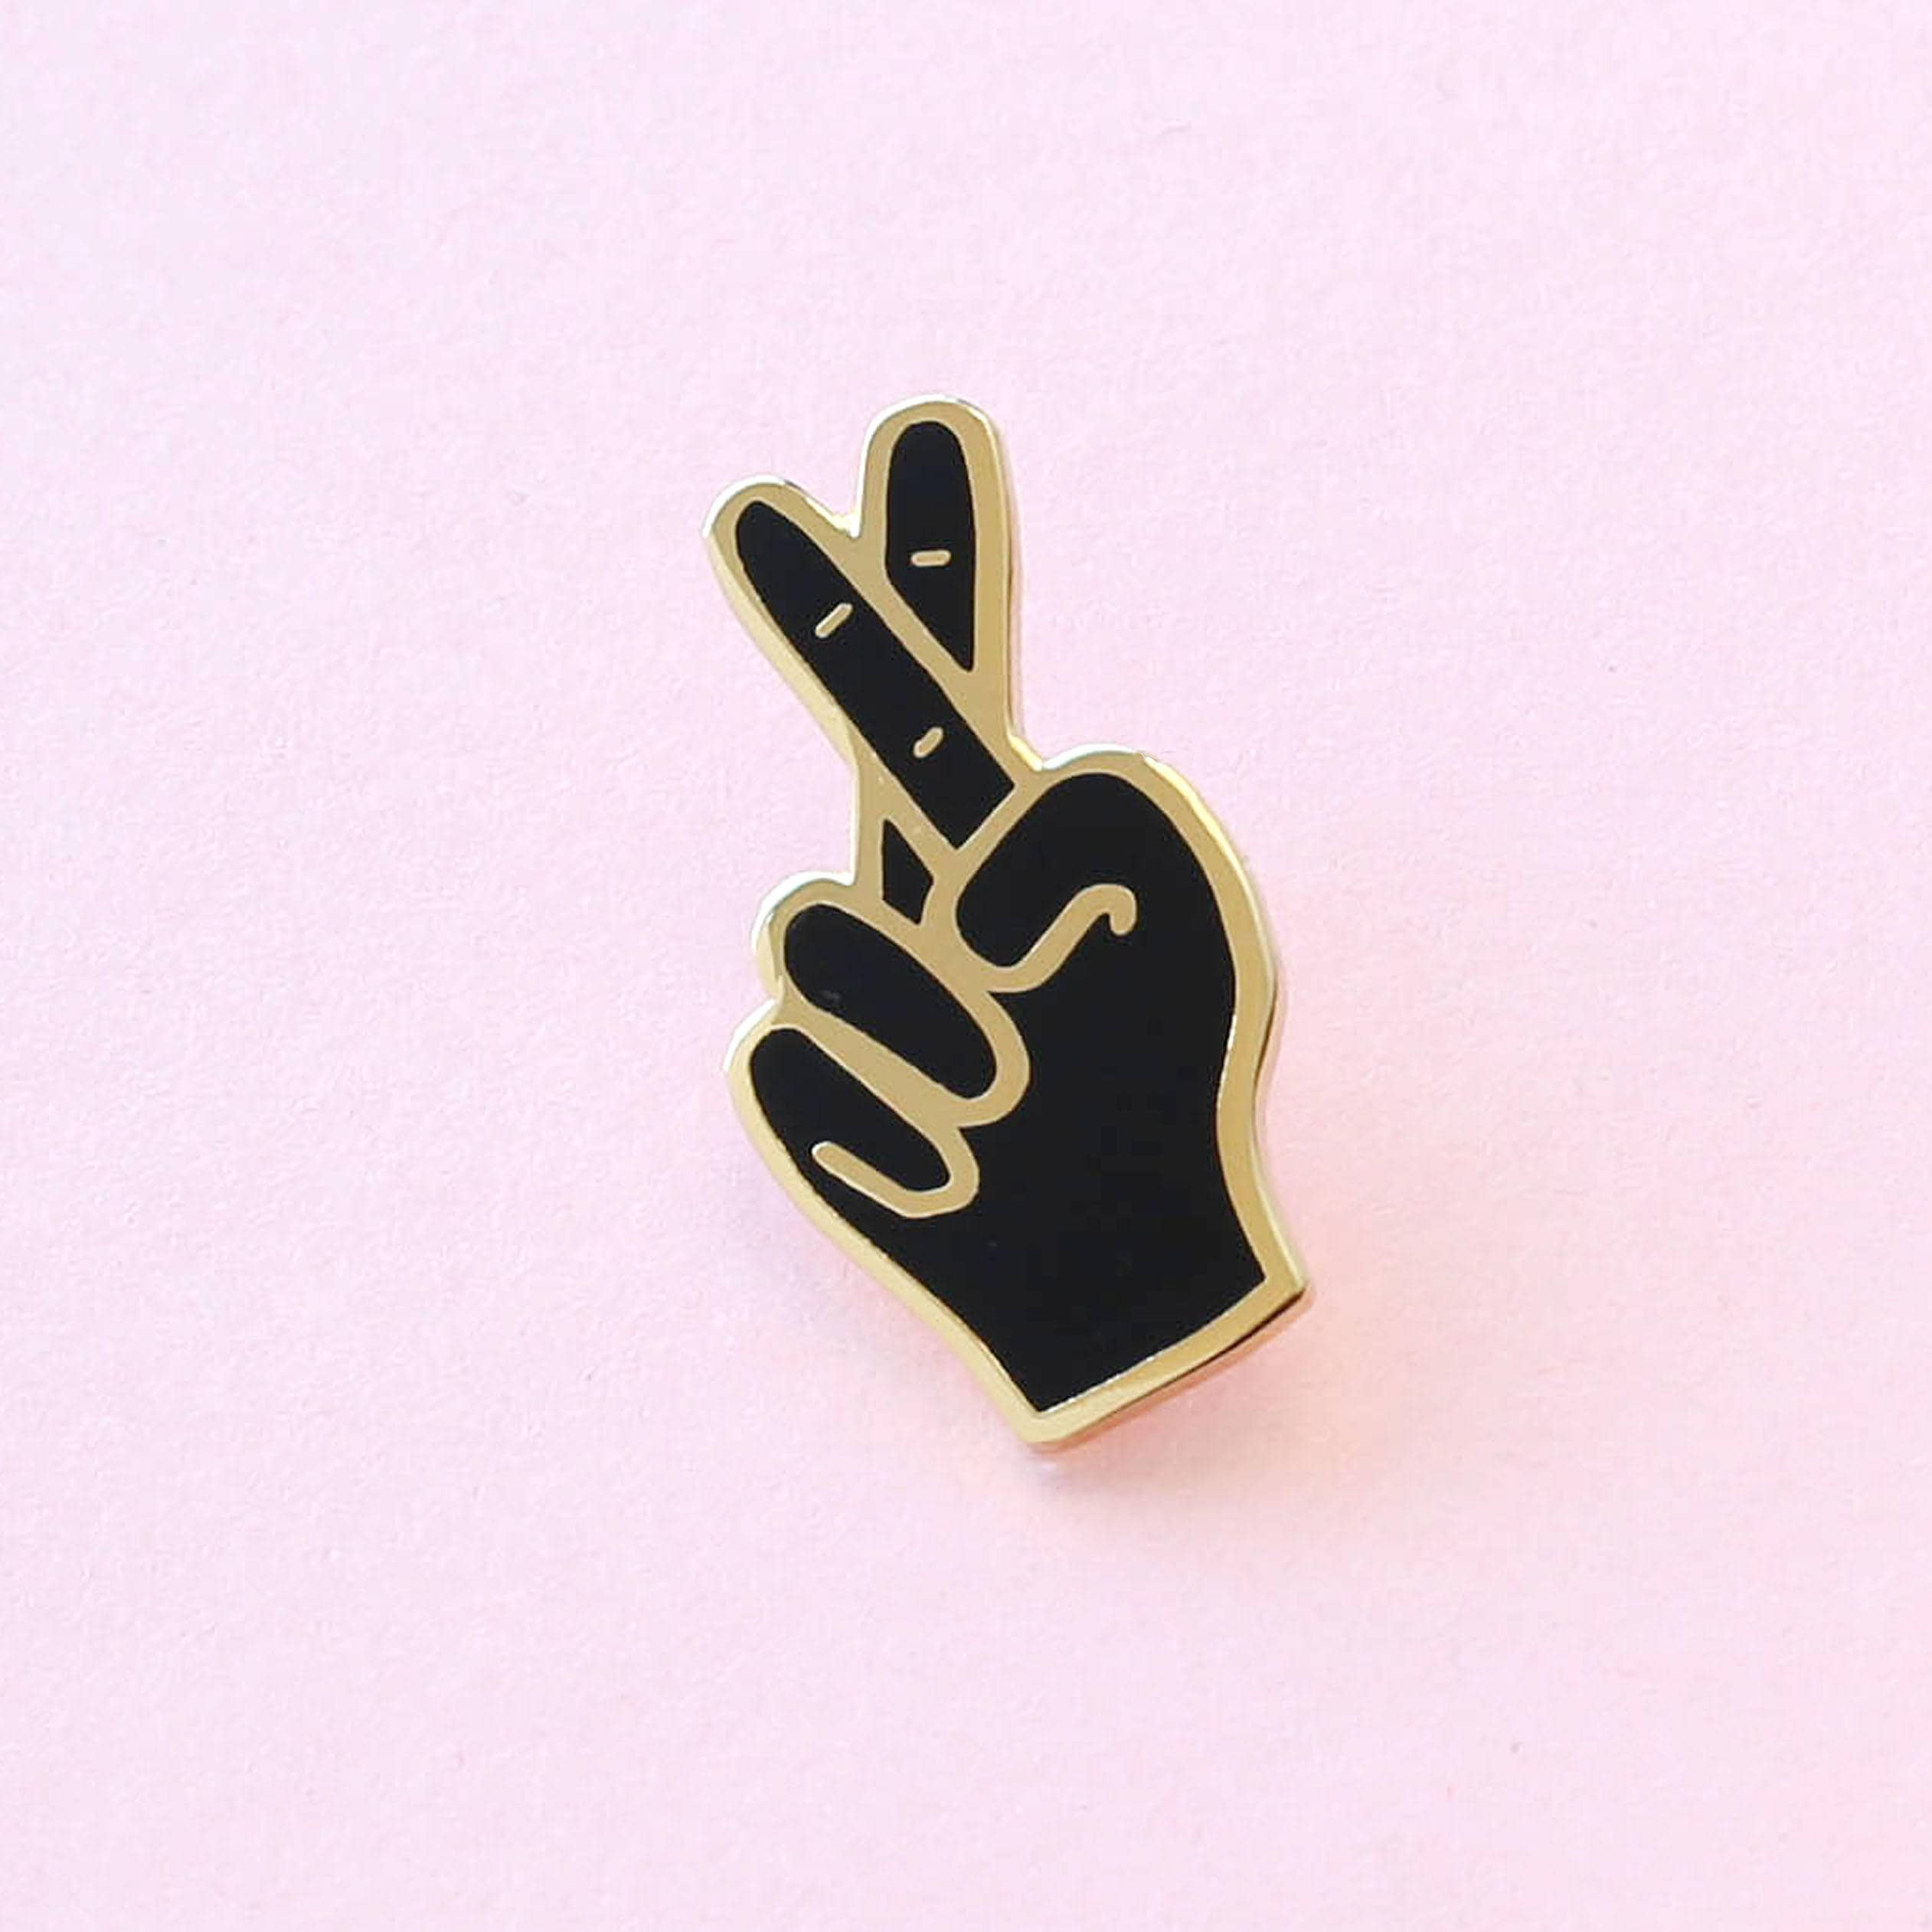 Enamel pin gold middle finger stick man funny pins gifts for teens funny  gifts for her funny gifts for him